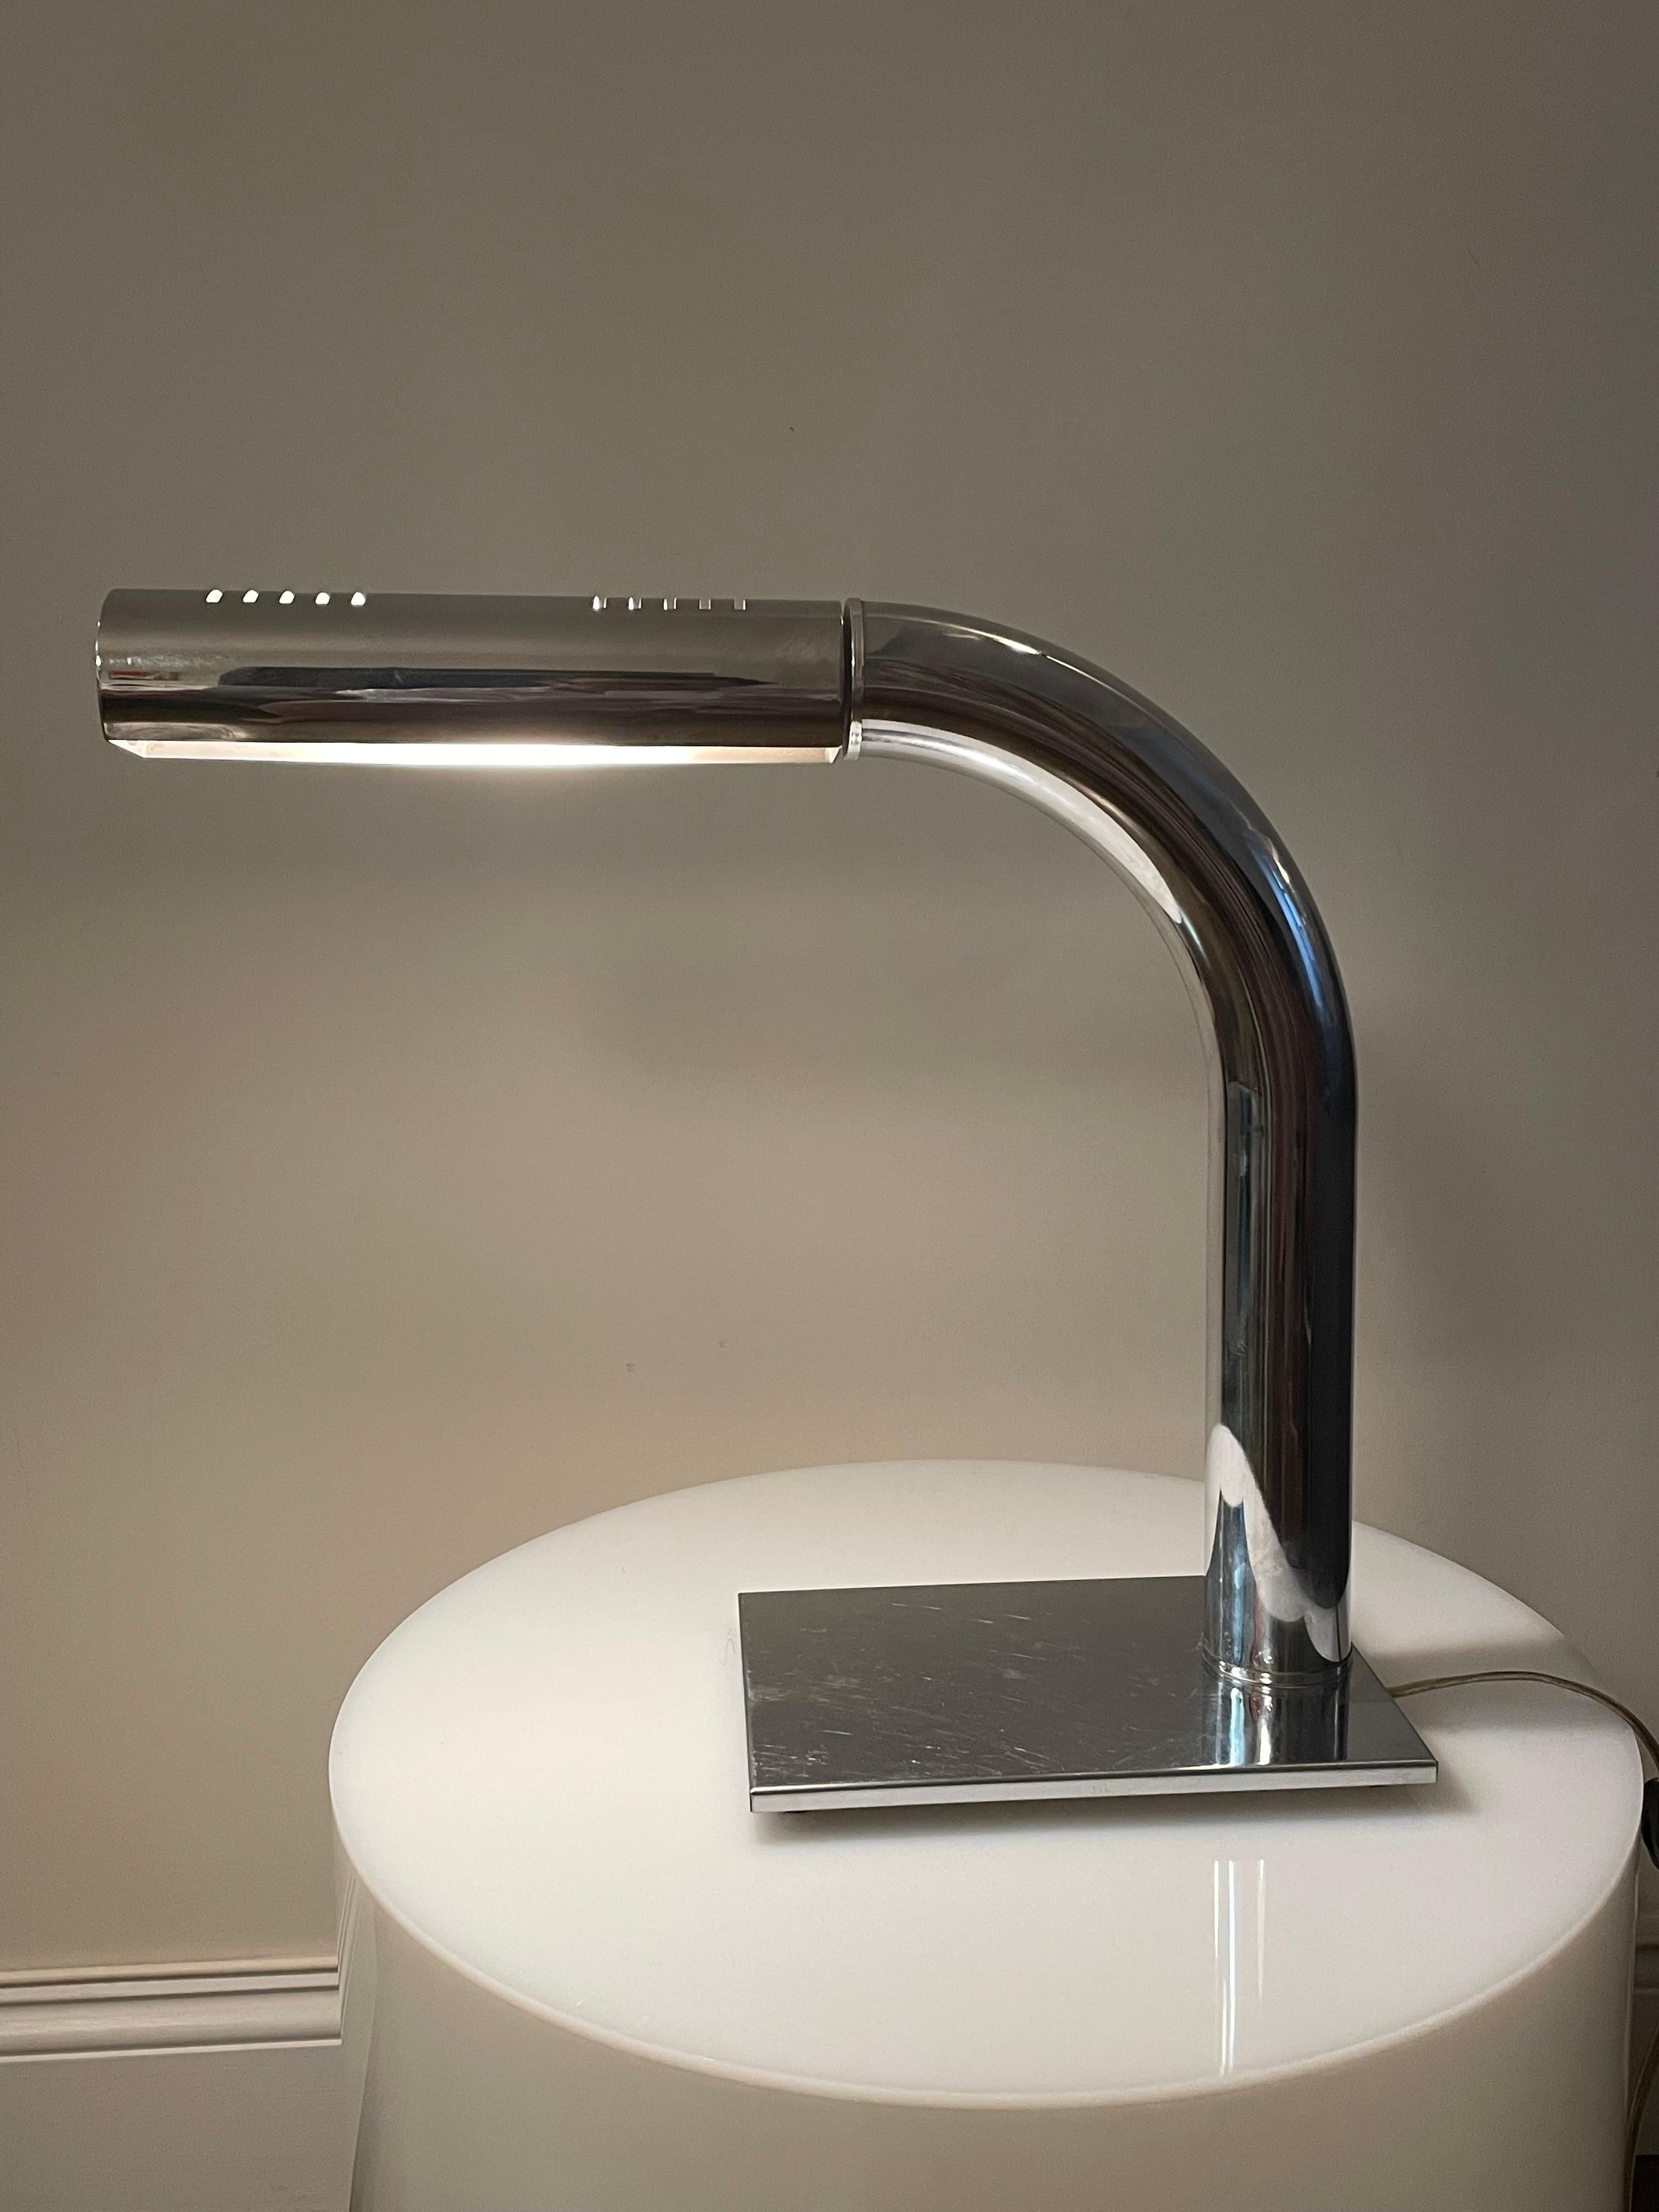 Late 20th Century Modernist Chrome Desk Lamp by Jim Bindman for the Rainbow Lamp Company  For Sale